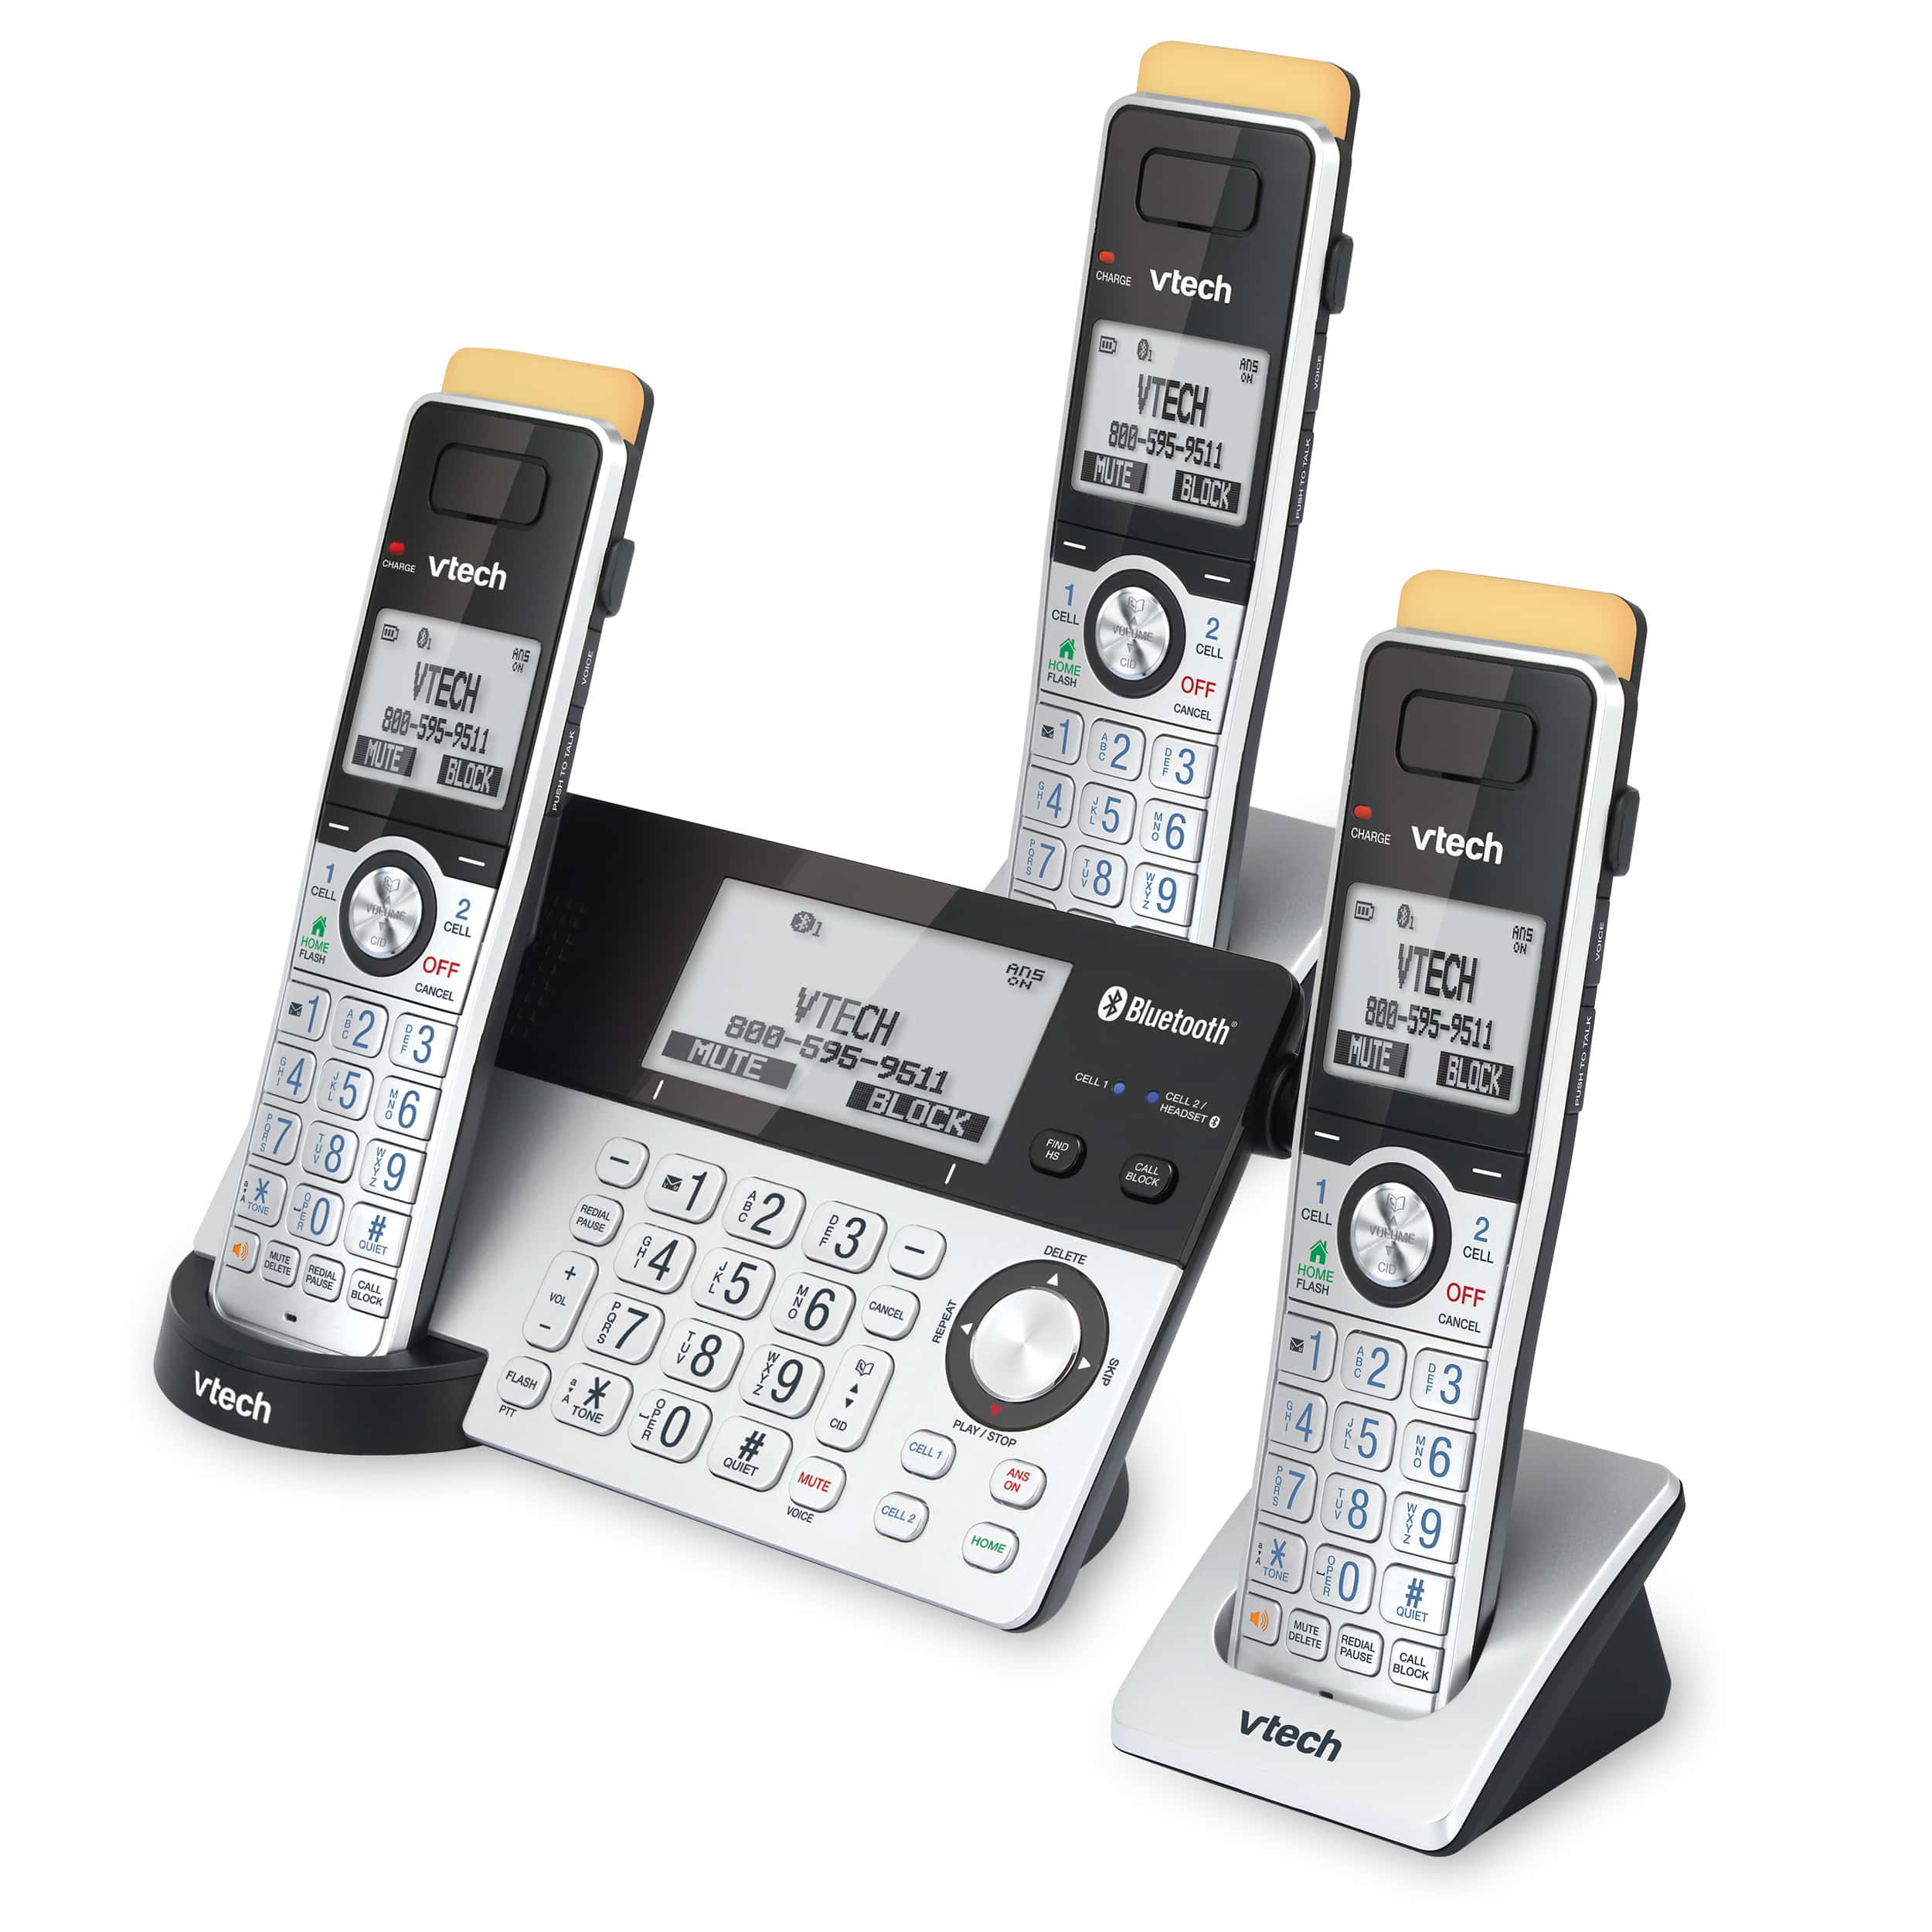 3-Handset Expandable Cordless Phone with Super Long Range, Bluetooth Connect to Cell, Smart Call Blocker and Answering System, IS8151-3 - view 2